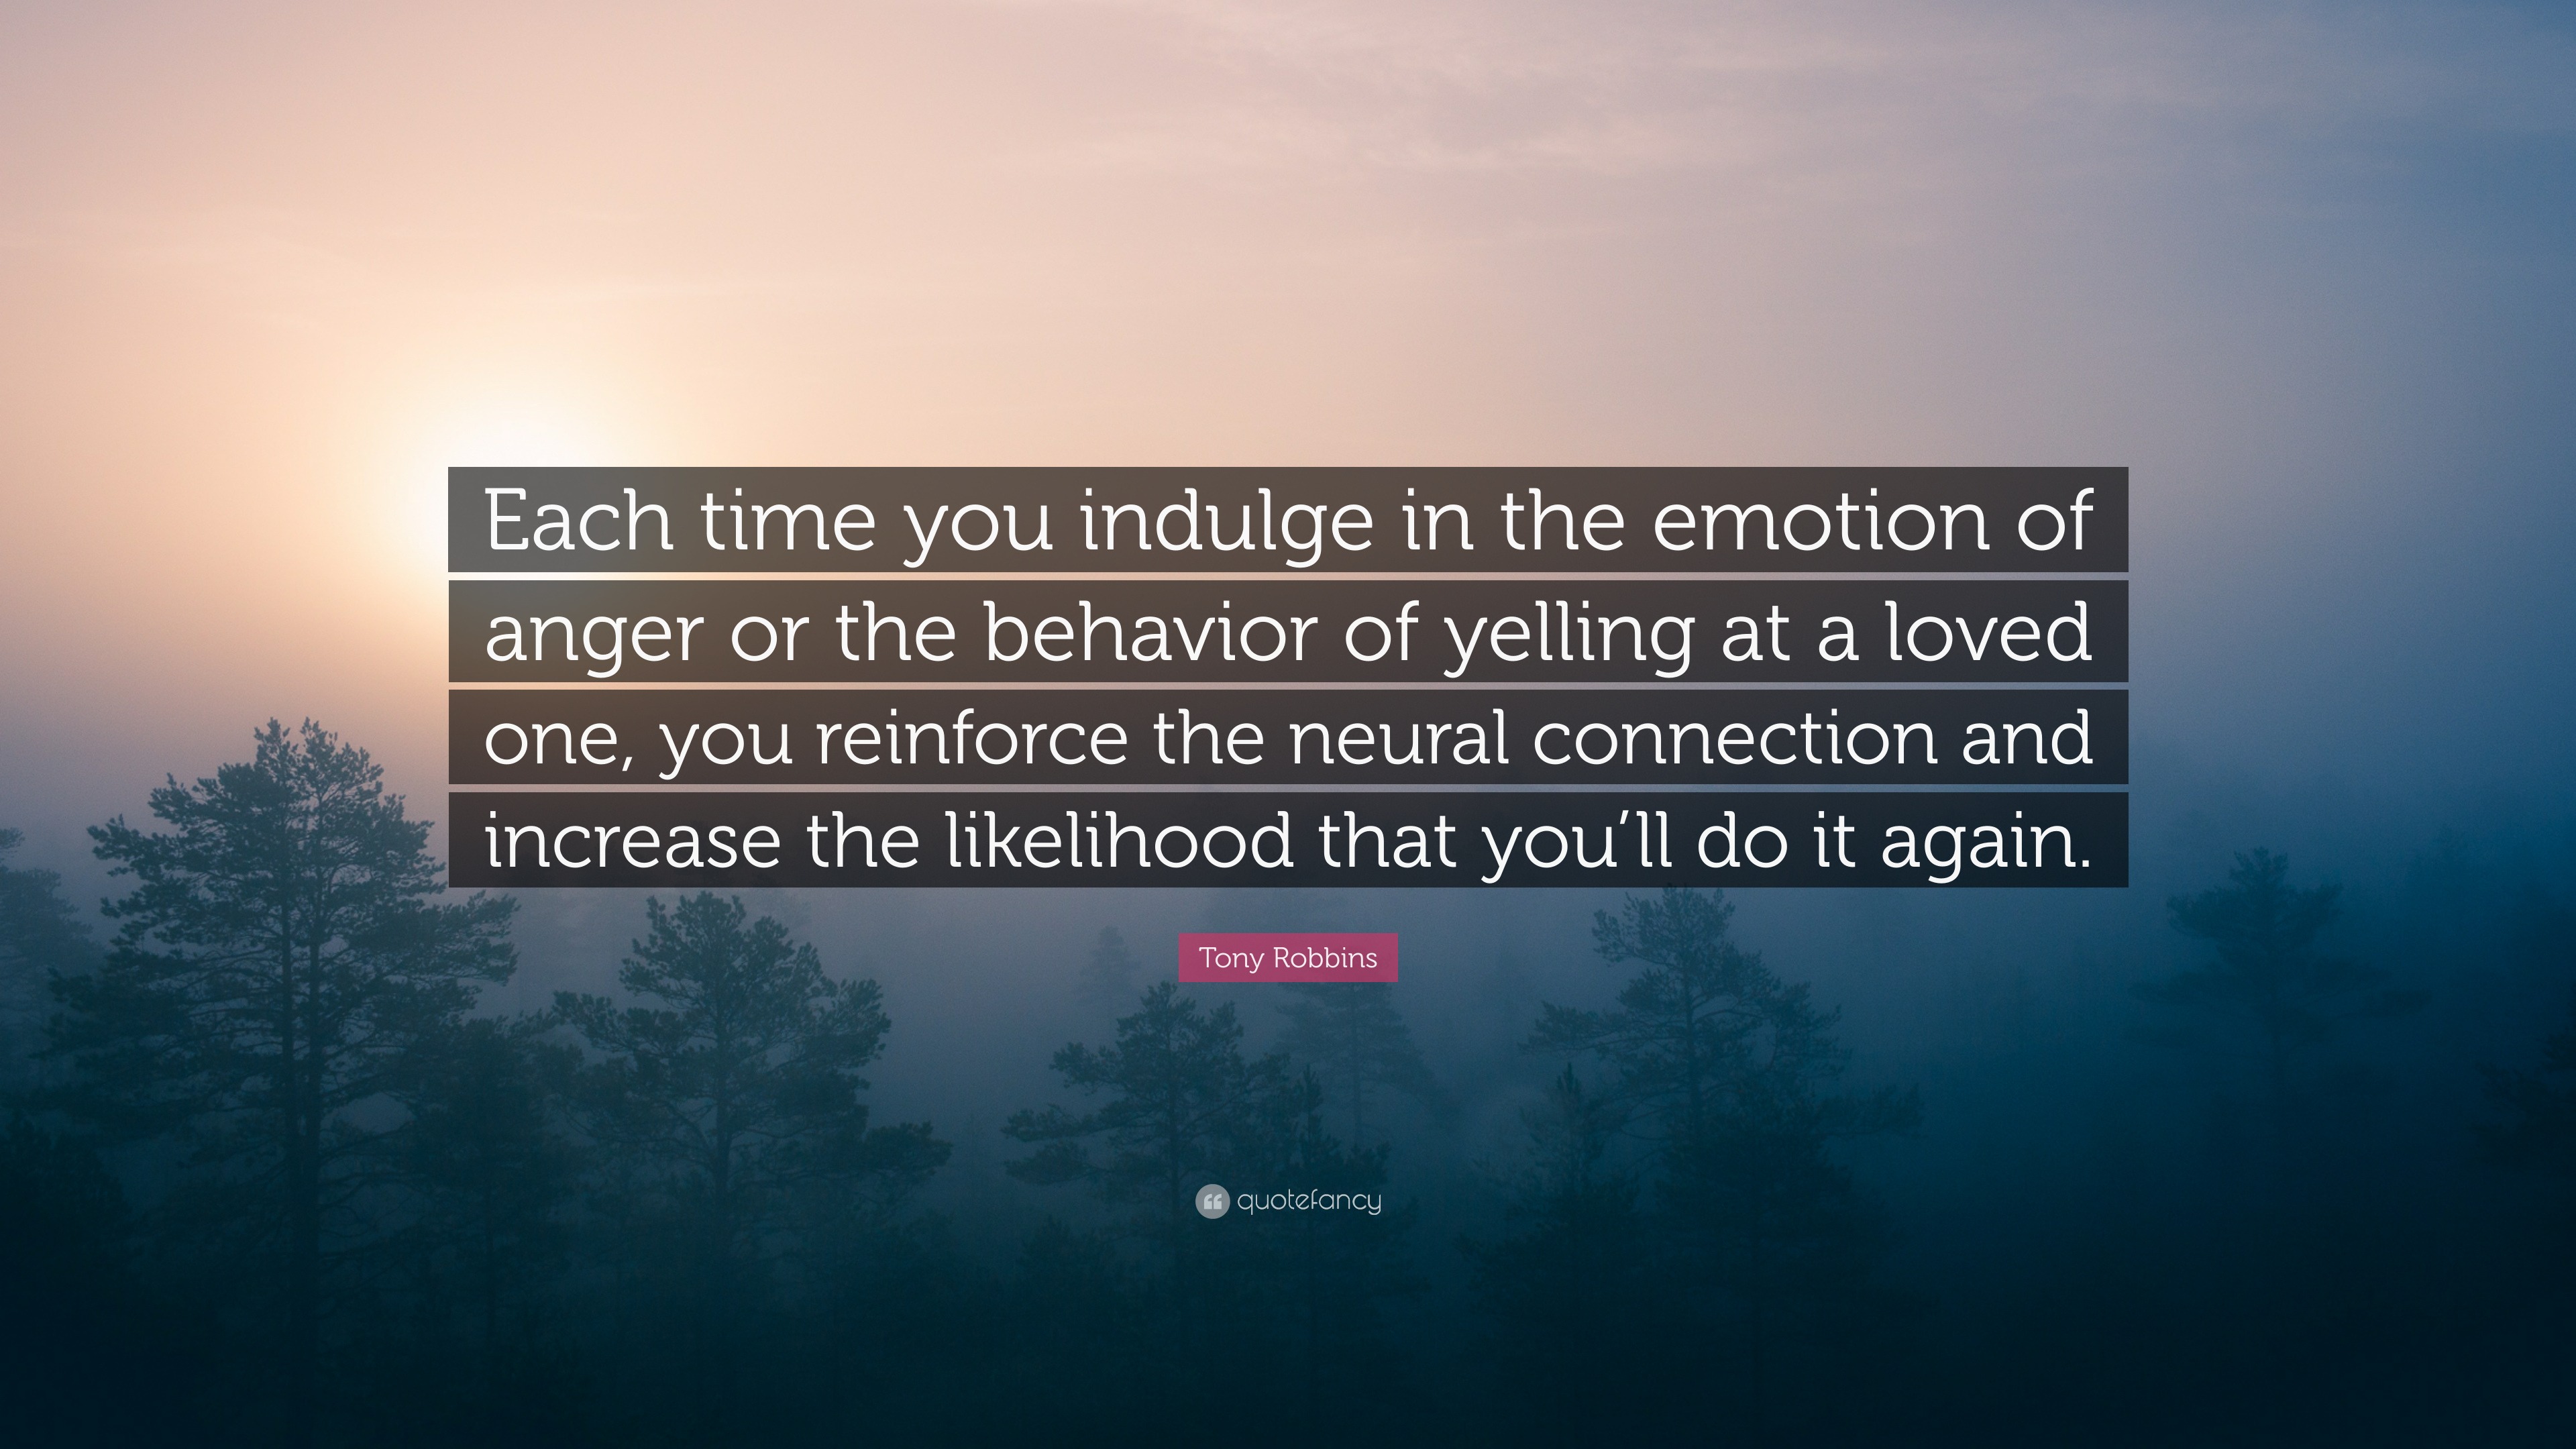 Tony Robbins Quote “Each time you indulge in the emotion of anger or the